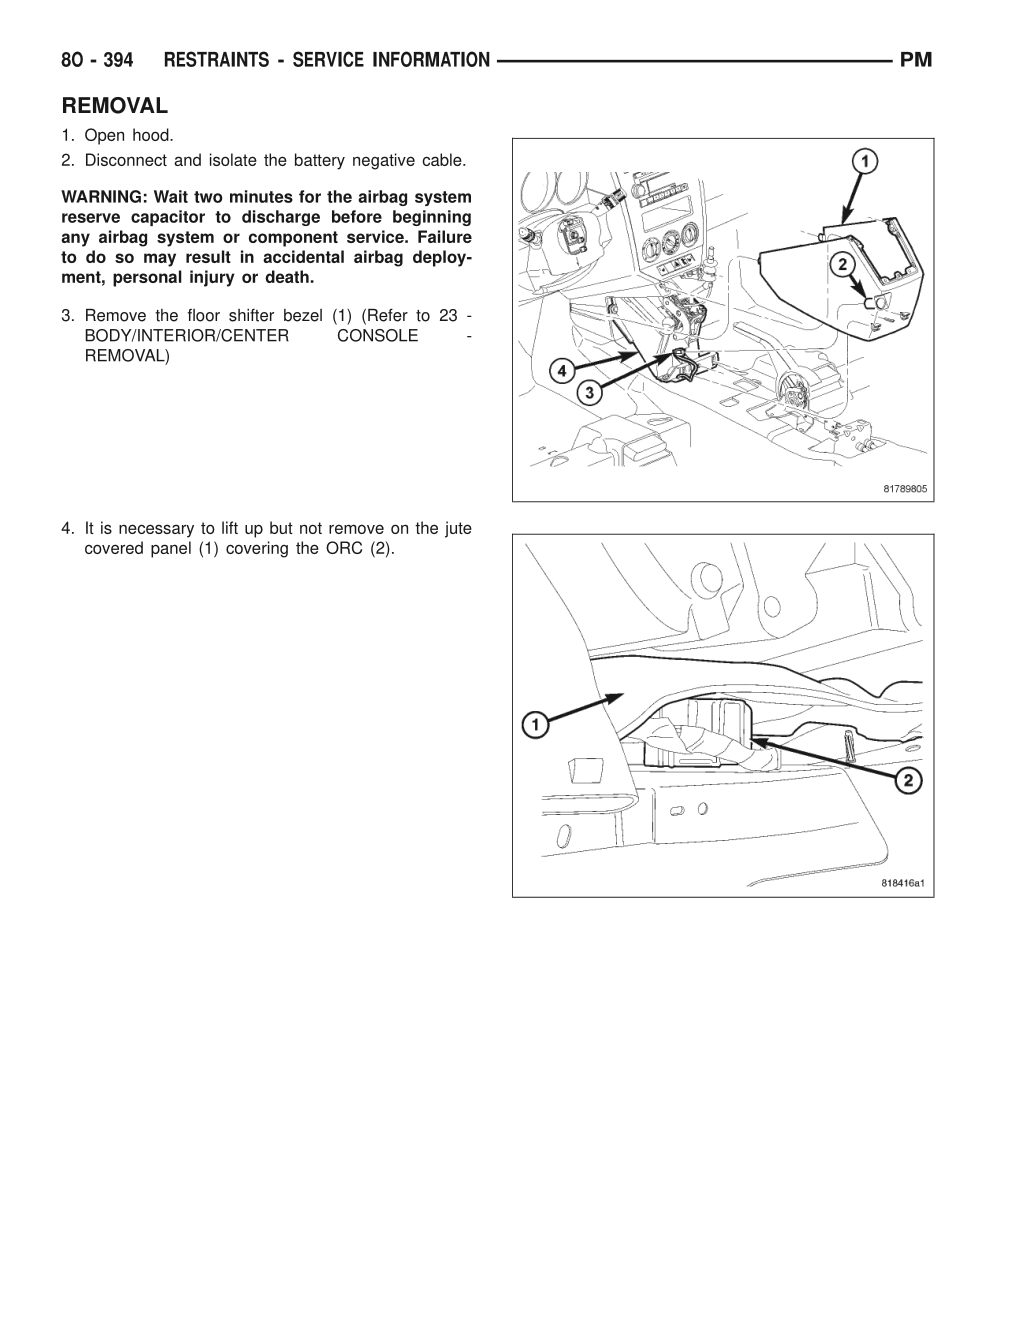 page 2005